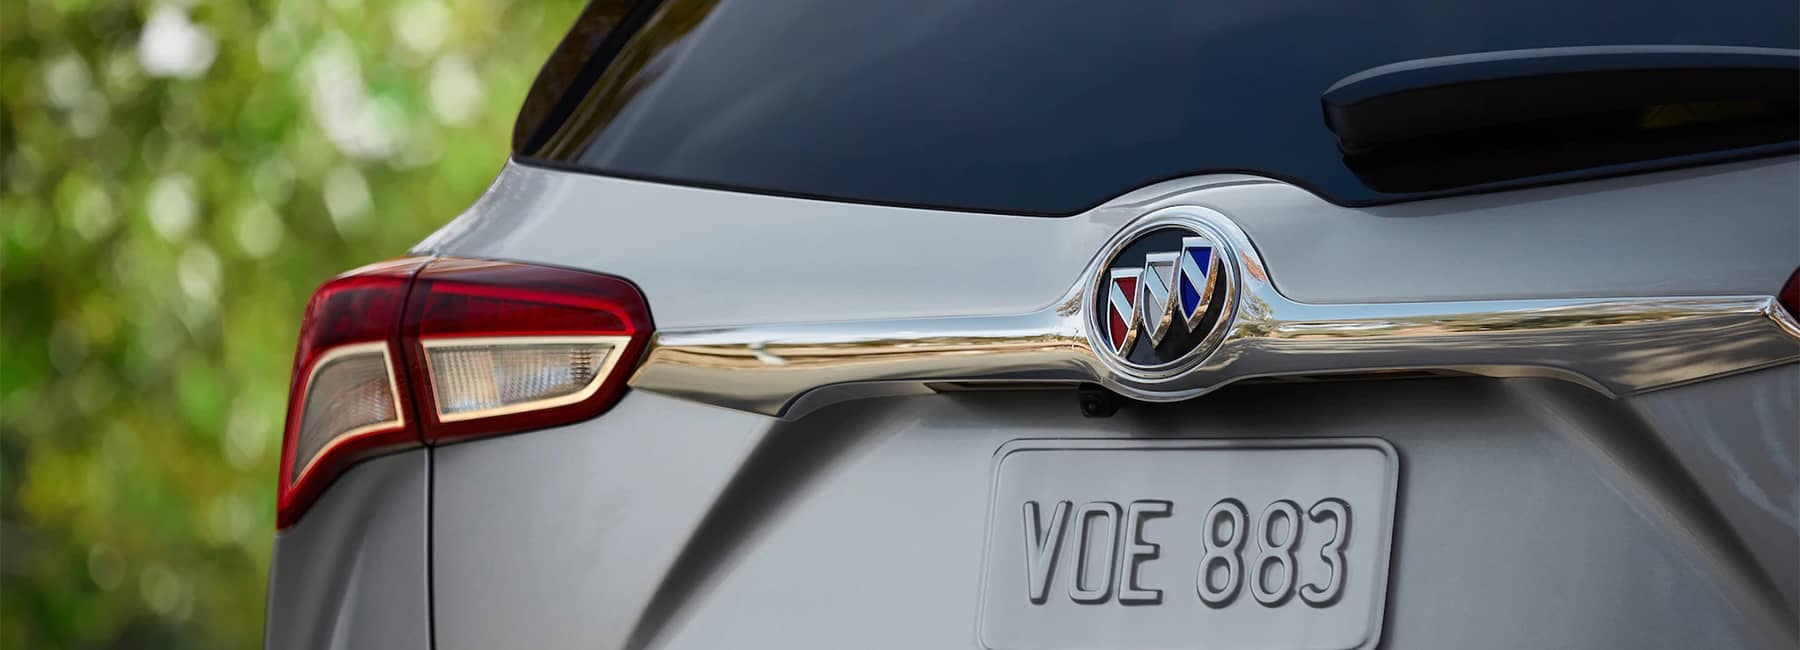 2020 Buick Envision Compact SUV Rear Liftgate Close Up